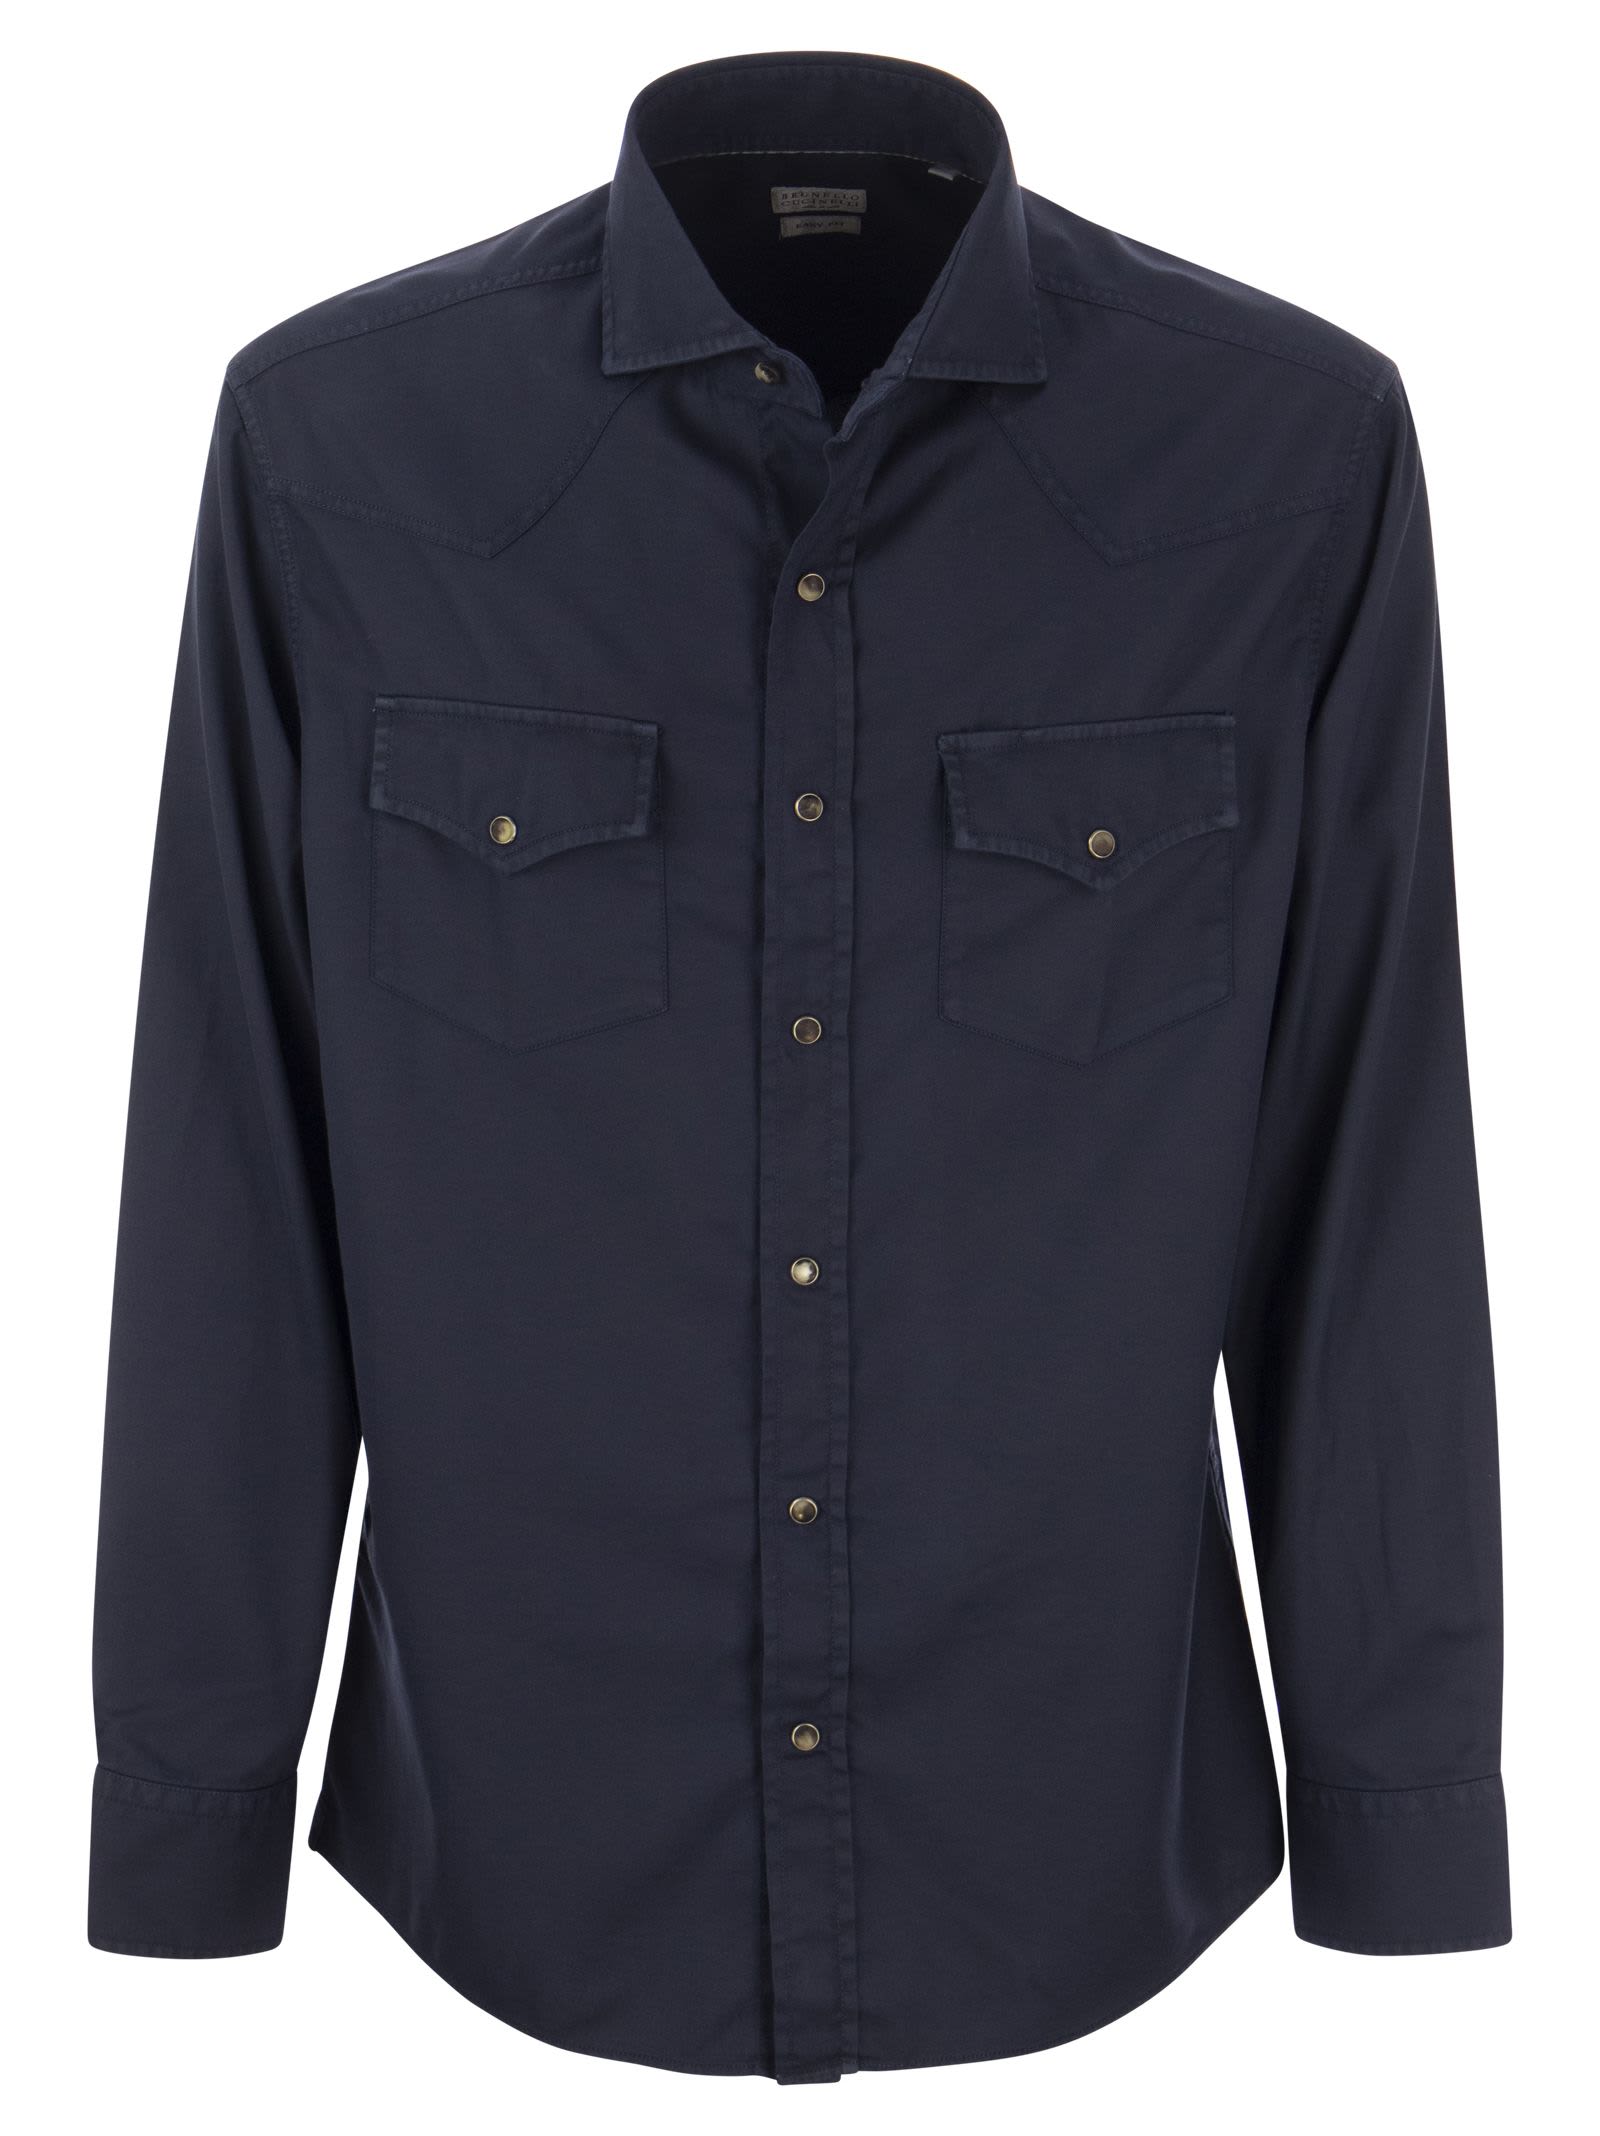 BRUNELLO CUCINELLI GARMENT-DYED EASY-FIT TWILL SHIRT WITH PRESS STUDS, EPAULETTES AND POCKETS